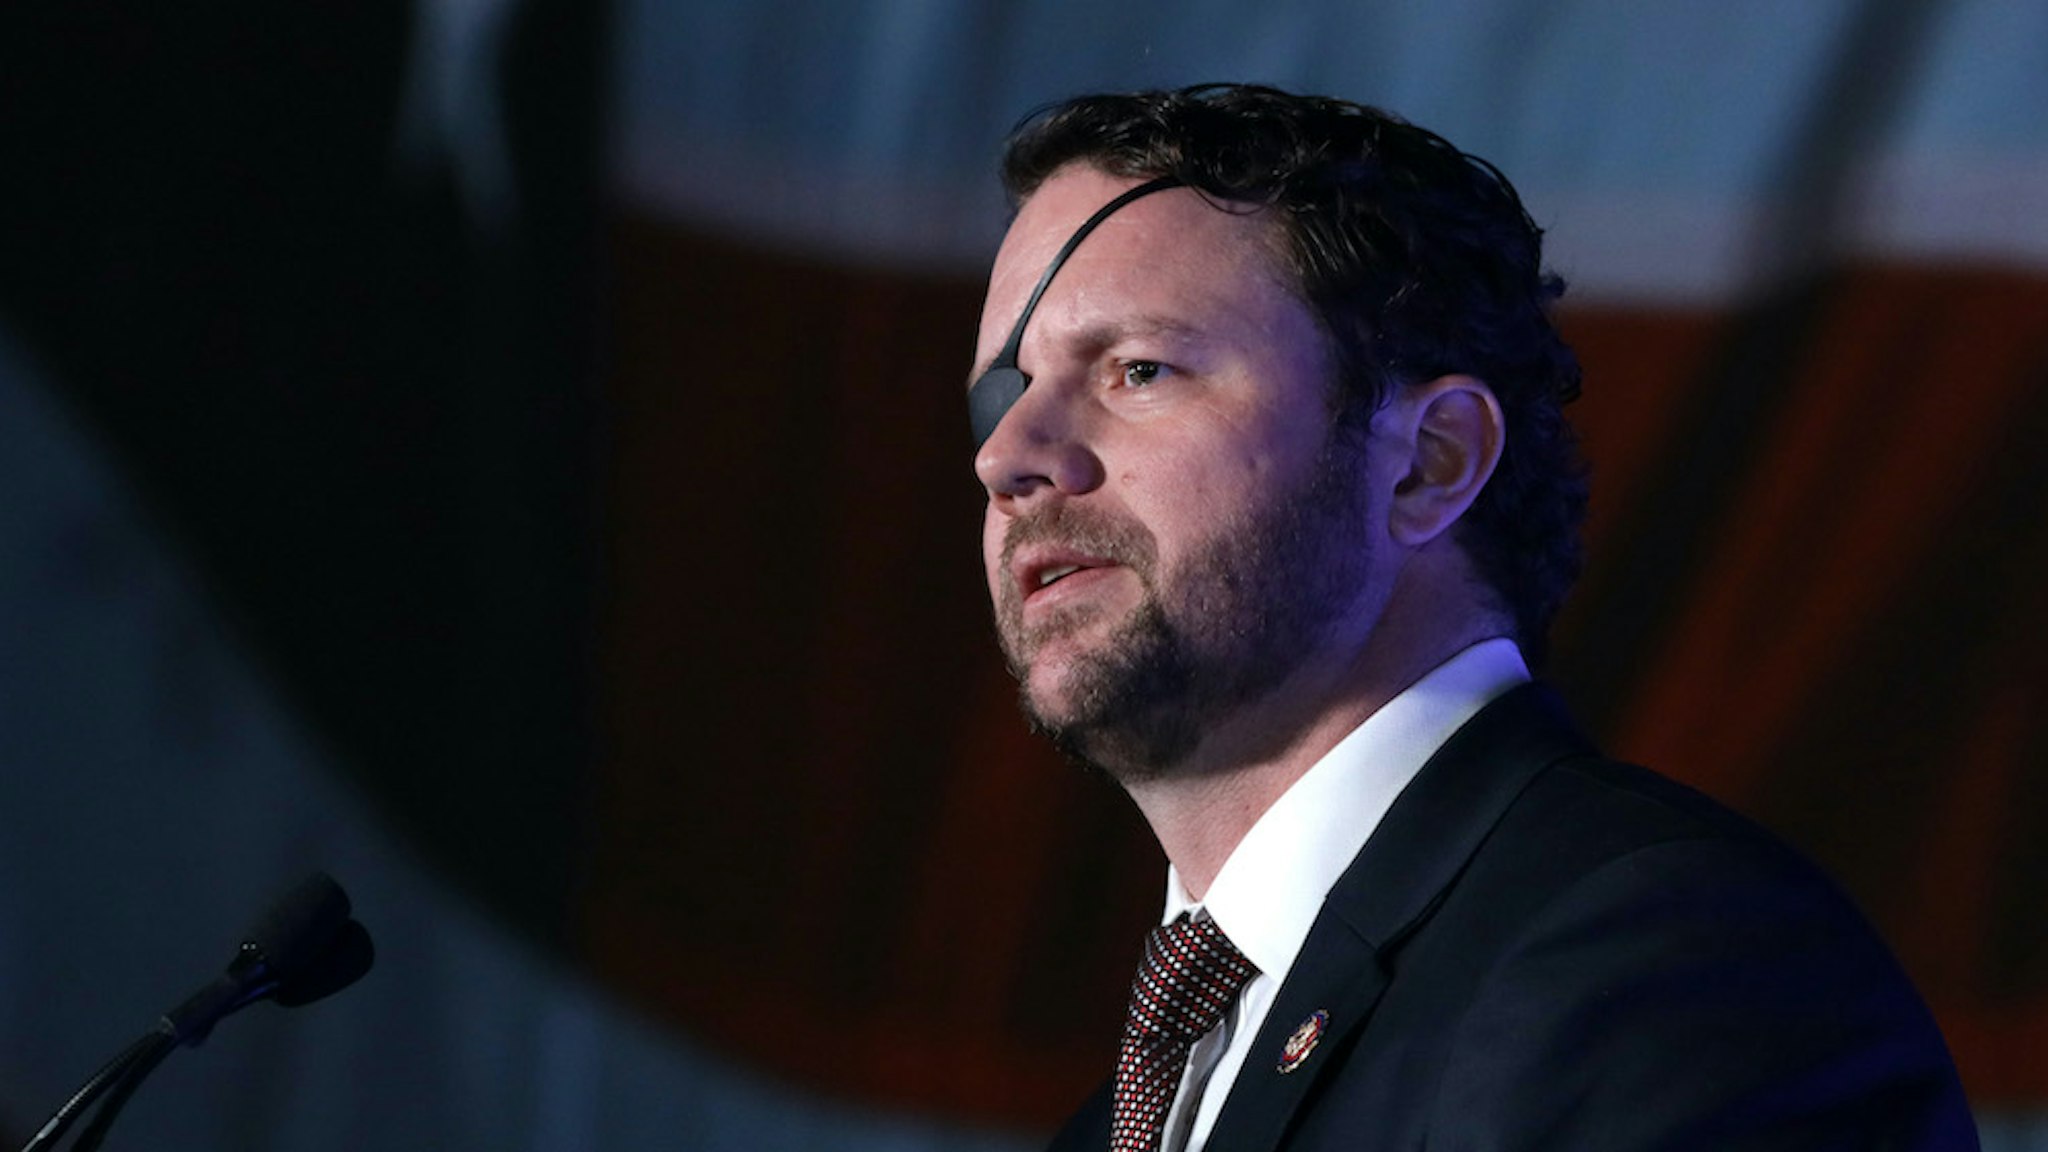 U.S. Rep. Dan Crenshaw (R-TX) speaks on ‚ÄúThe Fate of Our Culture and Our Nation Hangs in the Balance‚Äù during the CPAC Direct Action Training at the annual Conservative Political Action Conference at Gaylord National Resort &amp; Convention Center February 26, 2020 in National Harbor, Maryland. U.S. President Donald Trump is expected to address the annual event on February 29th. (Photo by Alex Wong/Getty Images)